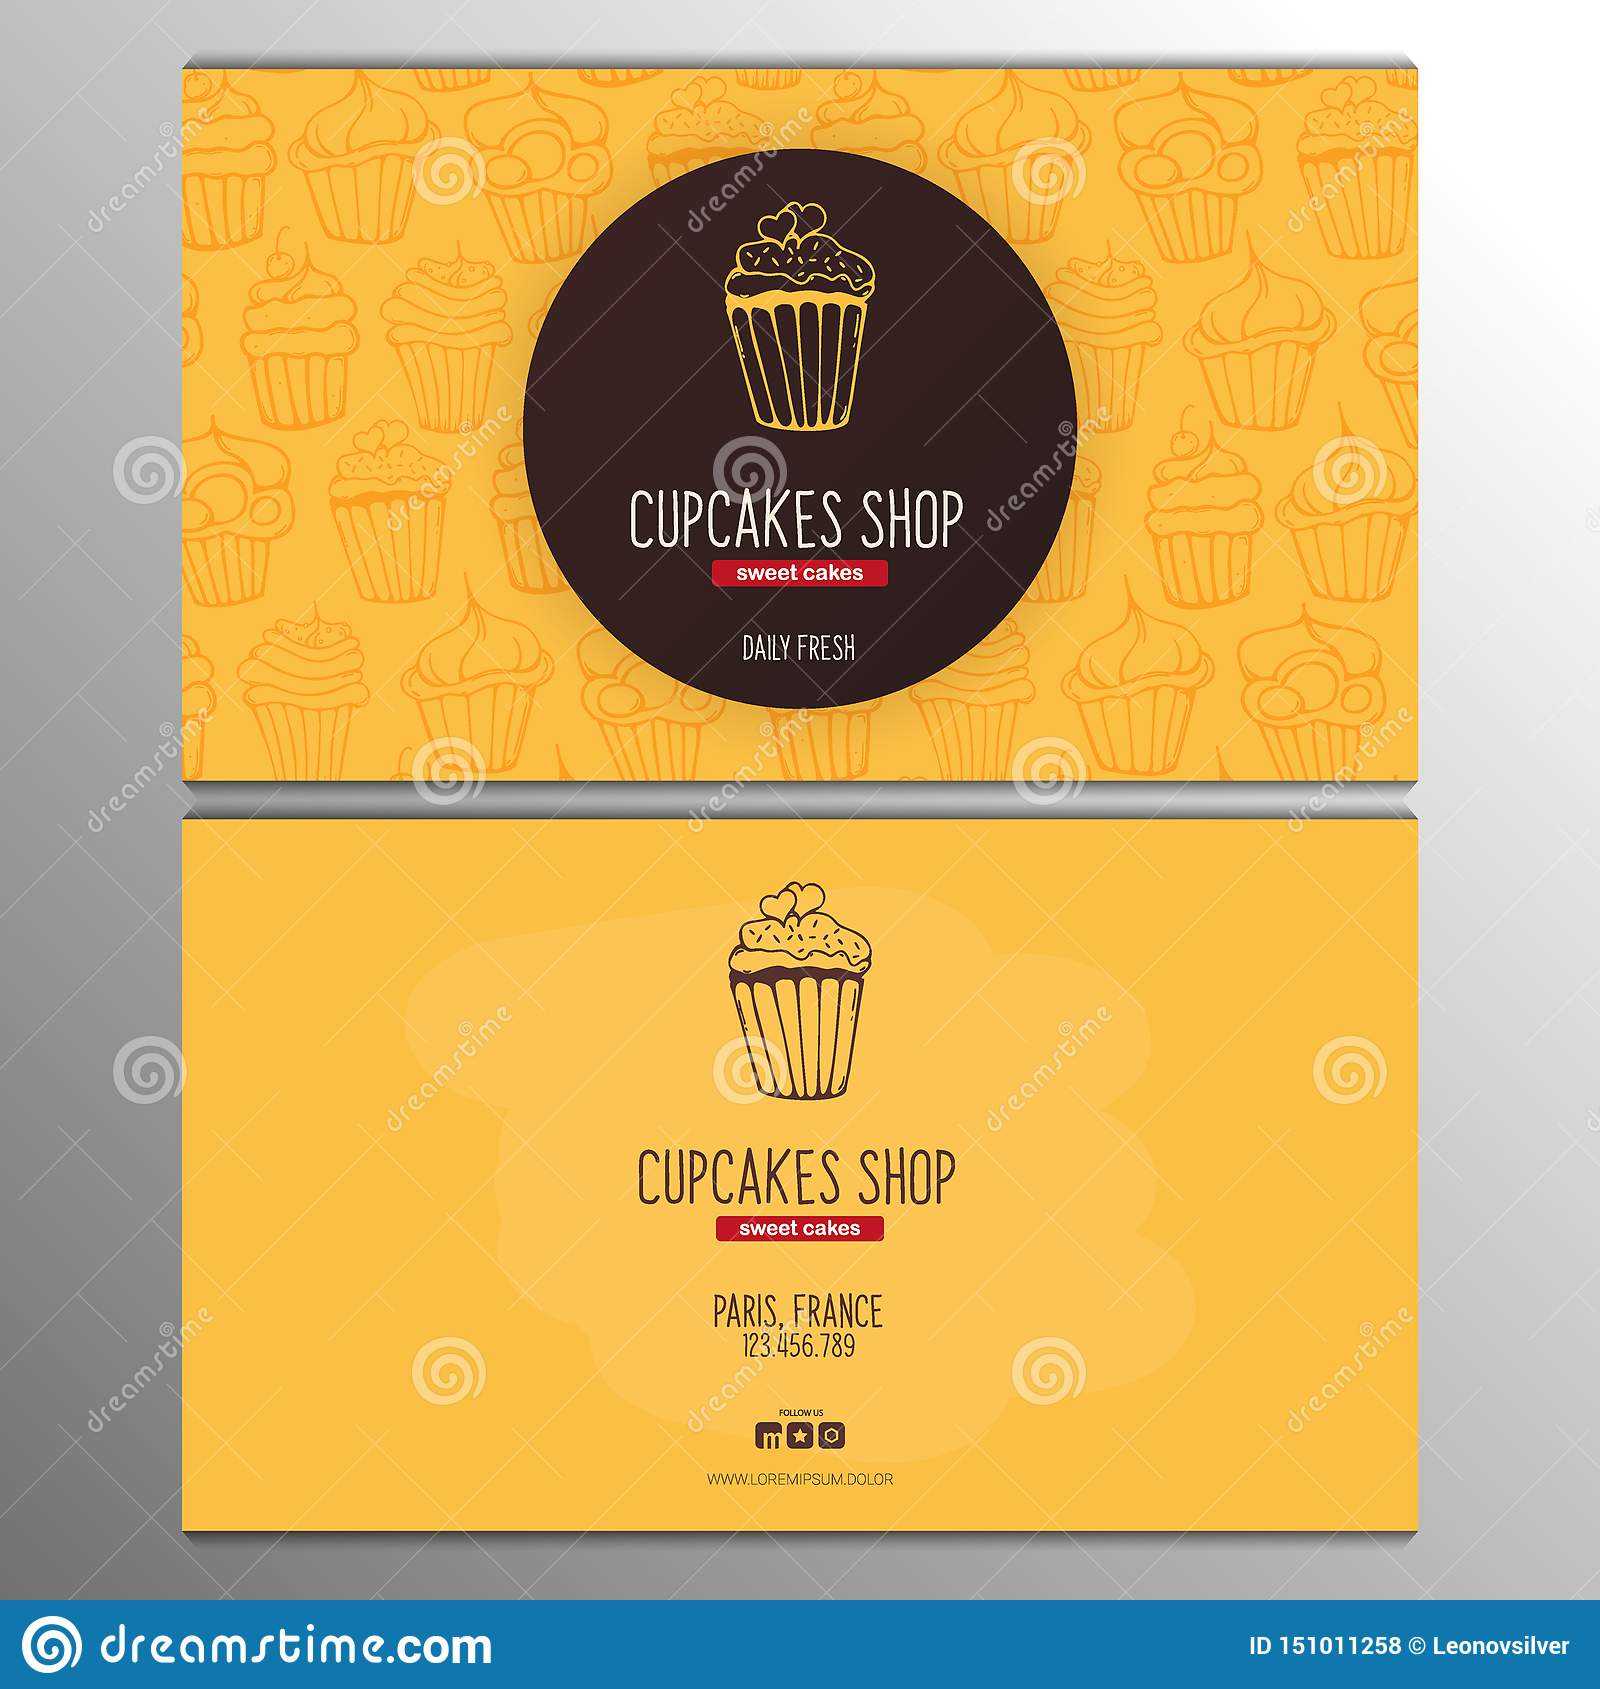 Cupcake Or Cake Business Card Template For Bakery Or Pastry In Cake Business Cards Templates Free